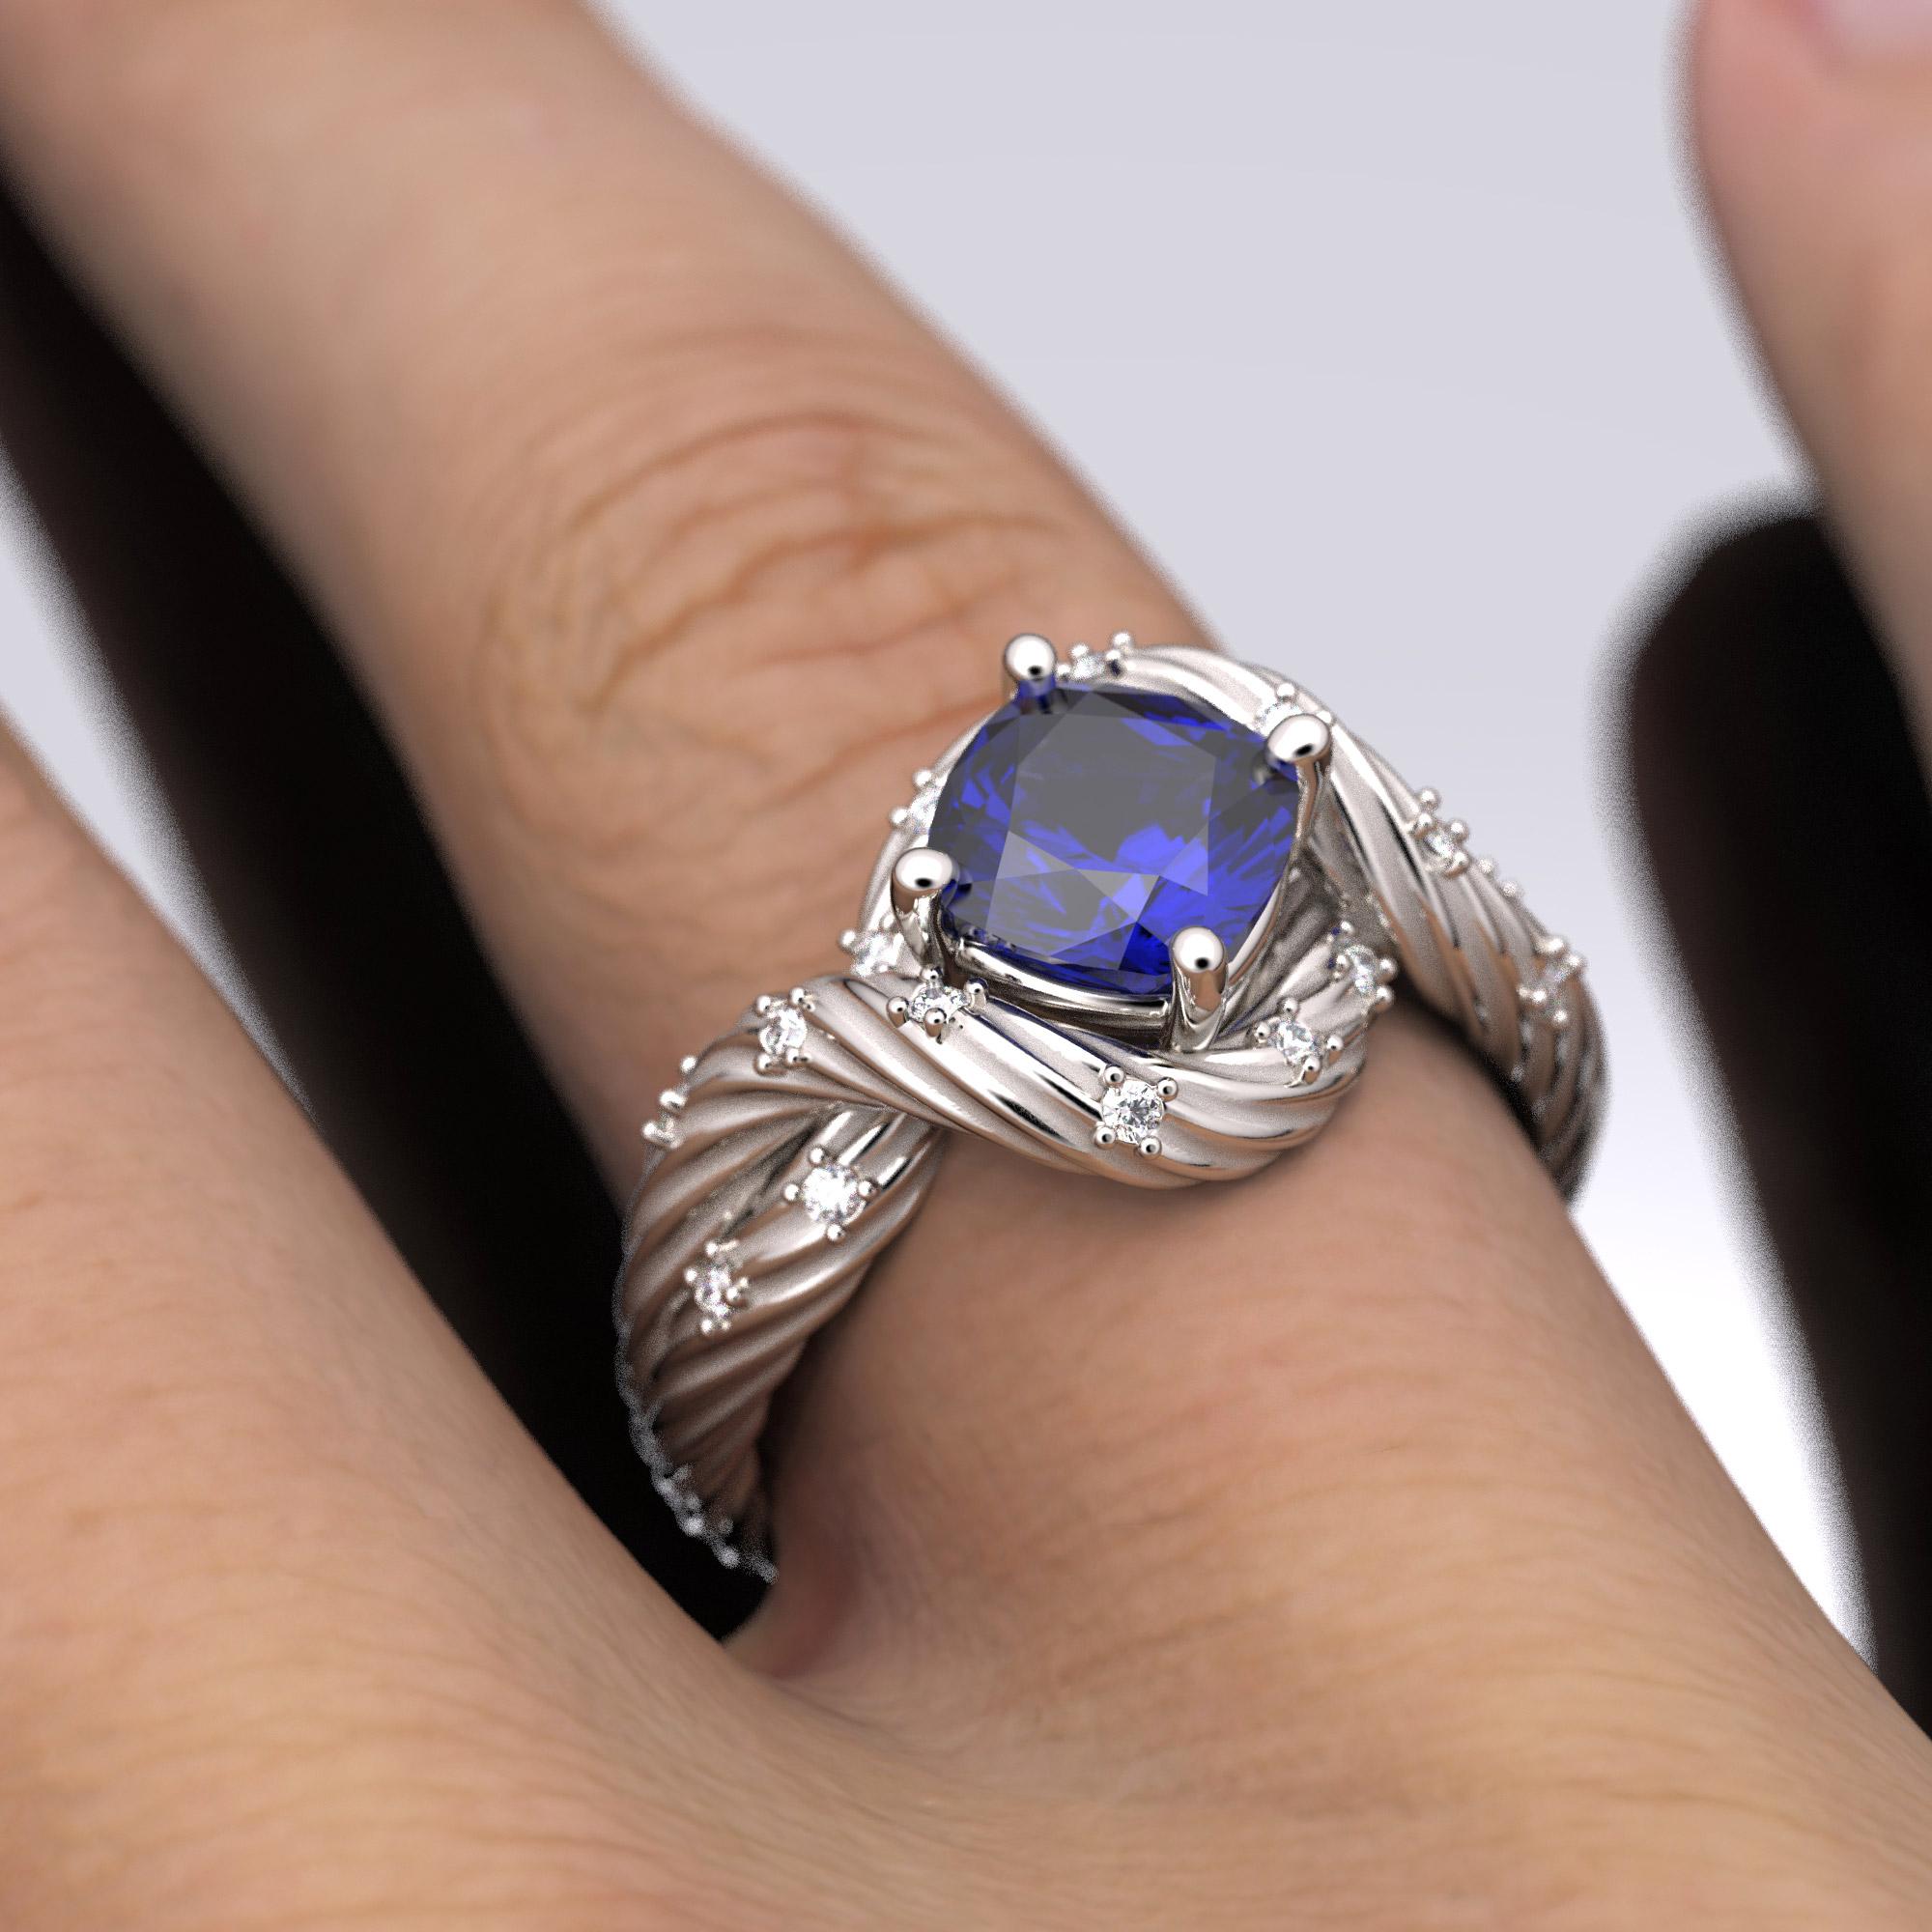 For Sale:  Tanzanite and Diamonds Ring 14k Solid Gold, Italian Fine Jewelry, made to order. 13